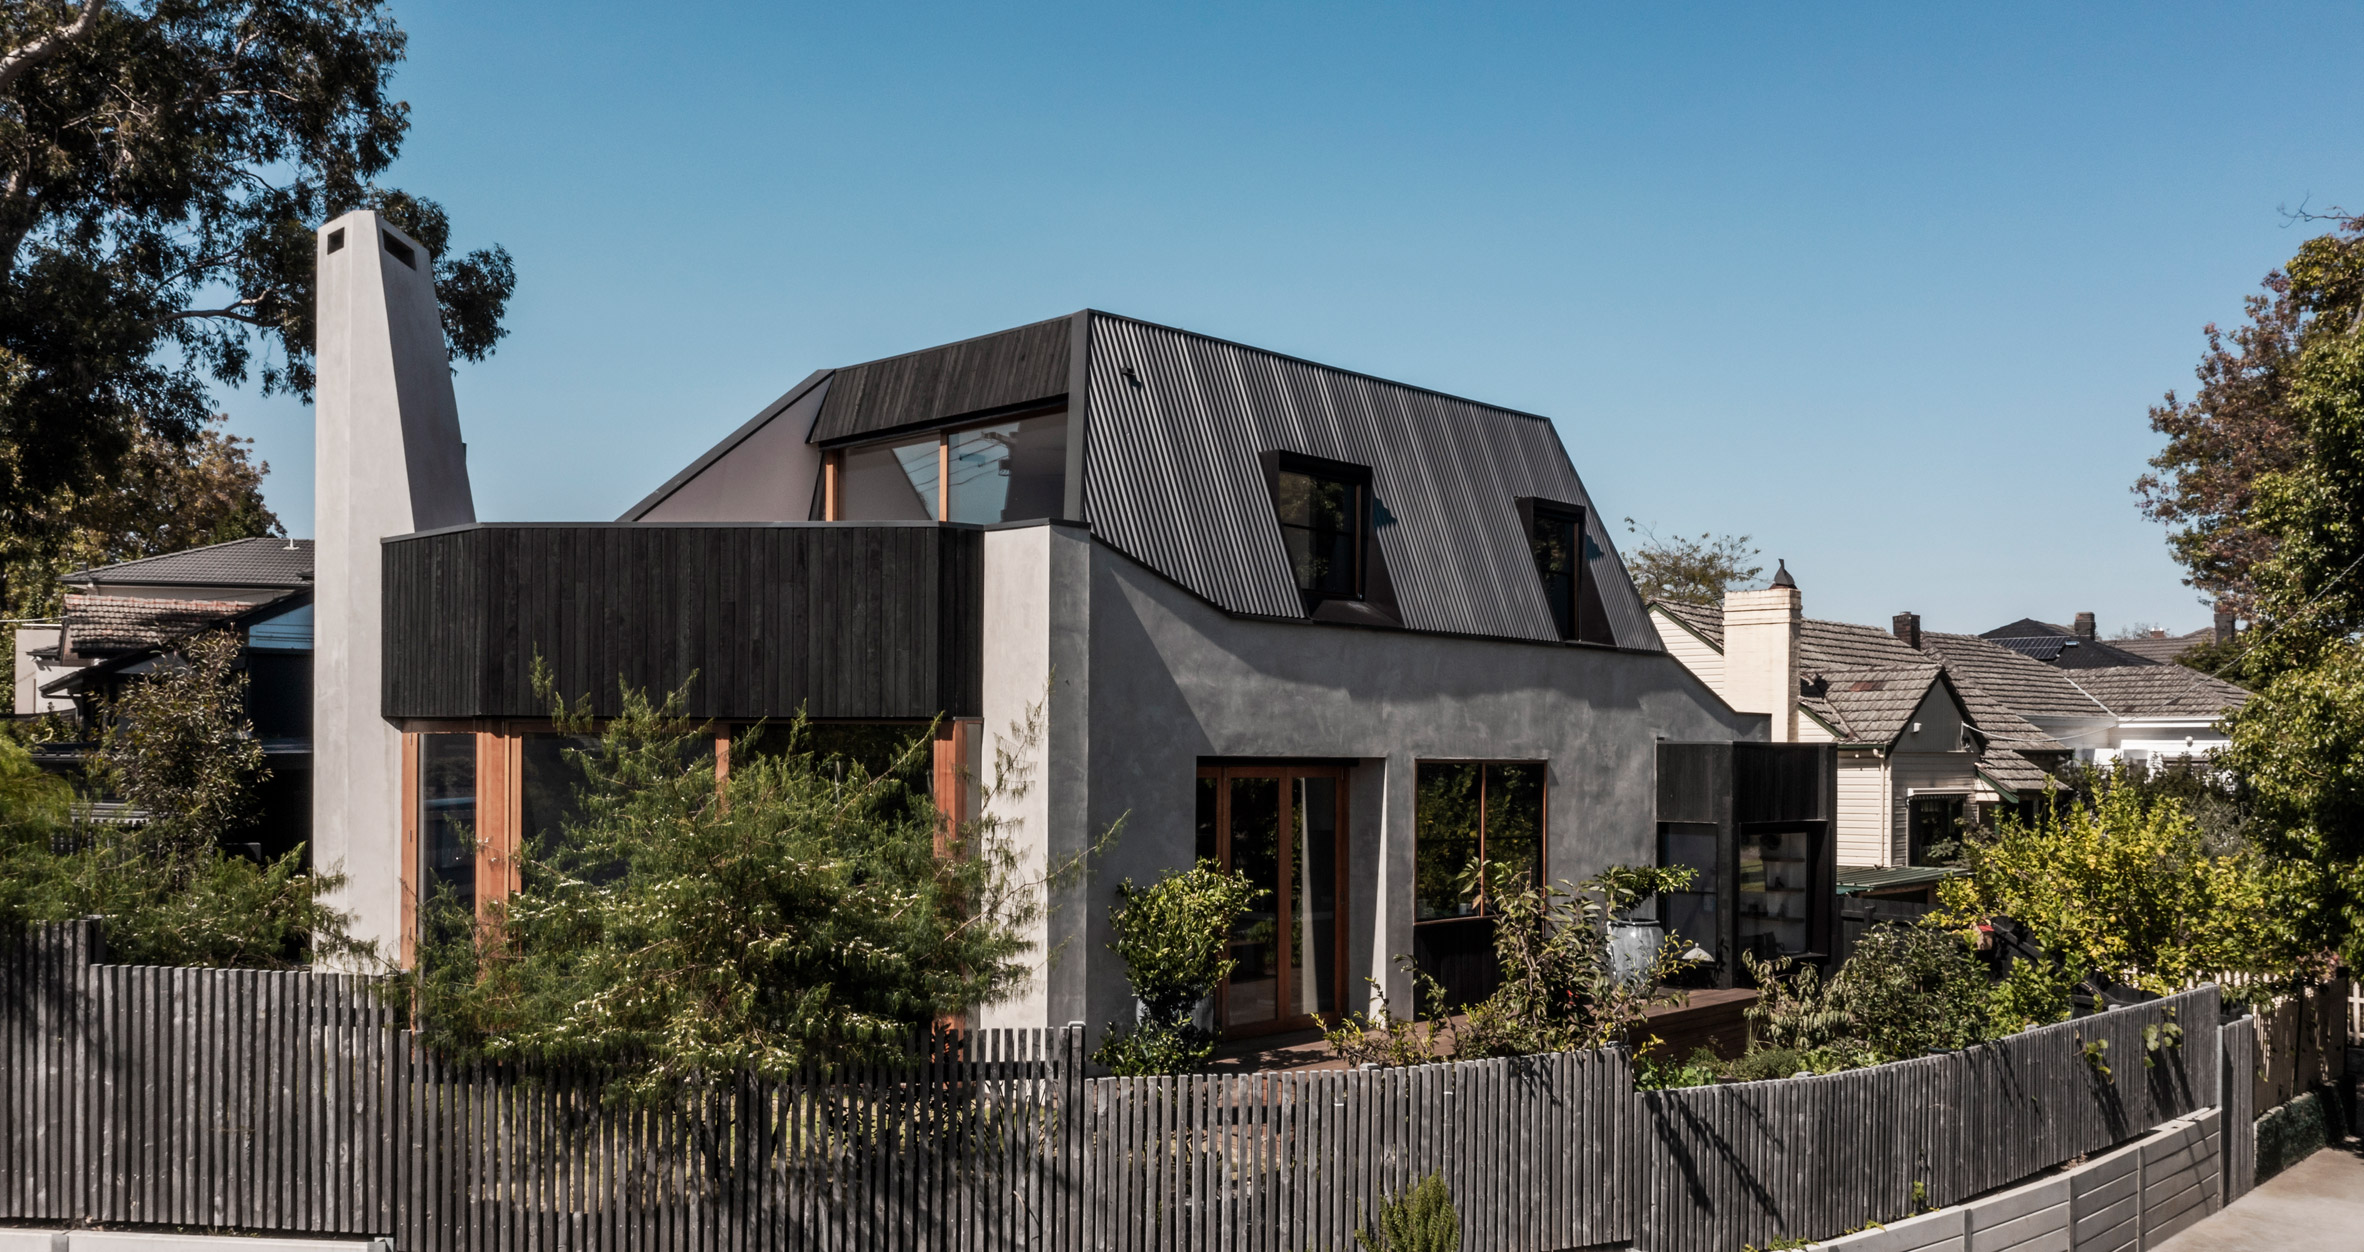 Black and grey exterior of Keep House by BKK Architects